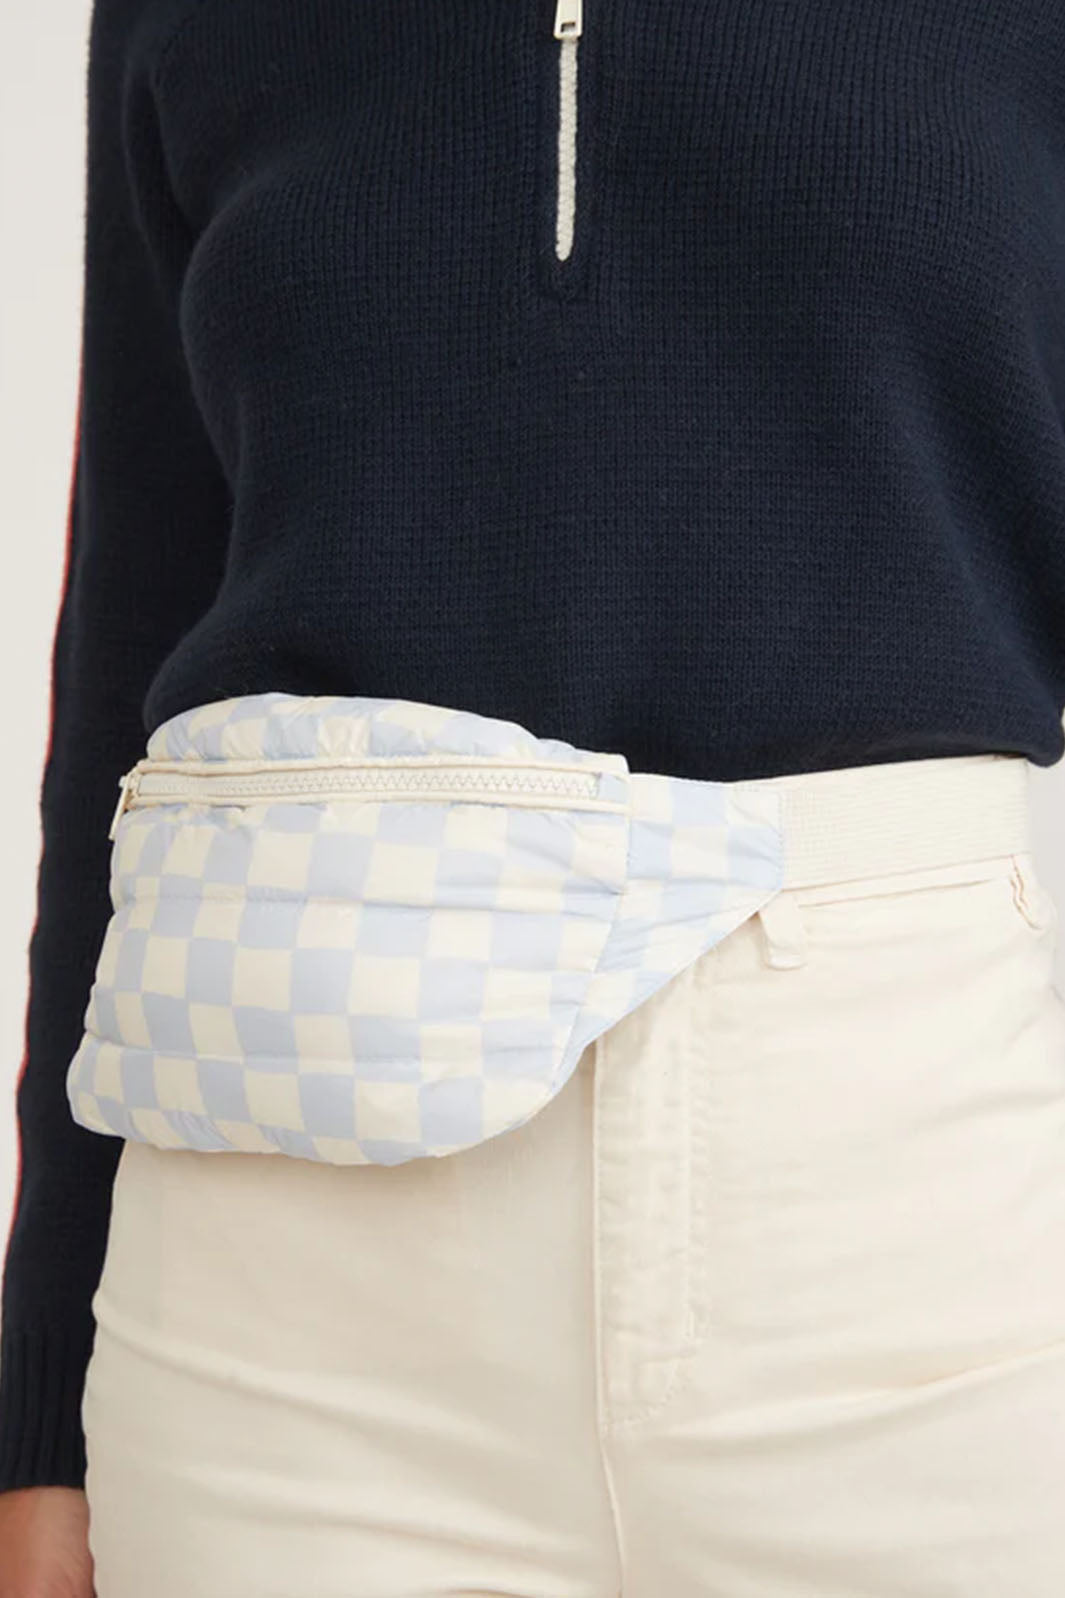 Archive Puffer Fanny Pack - Arctic Ice